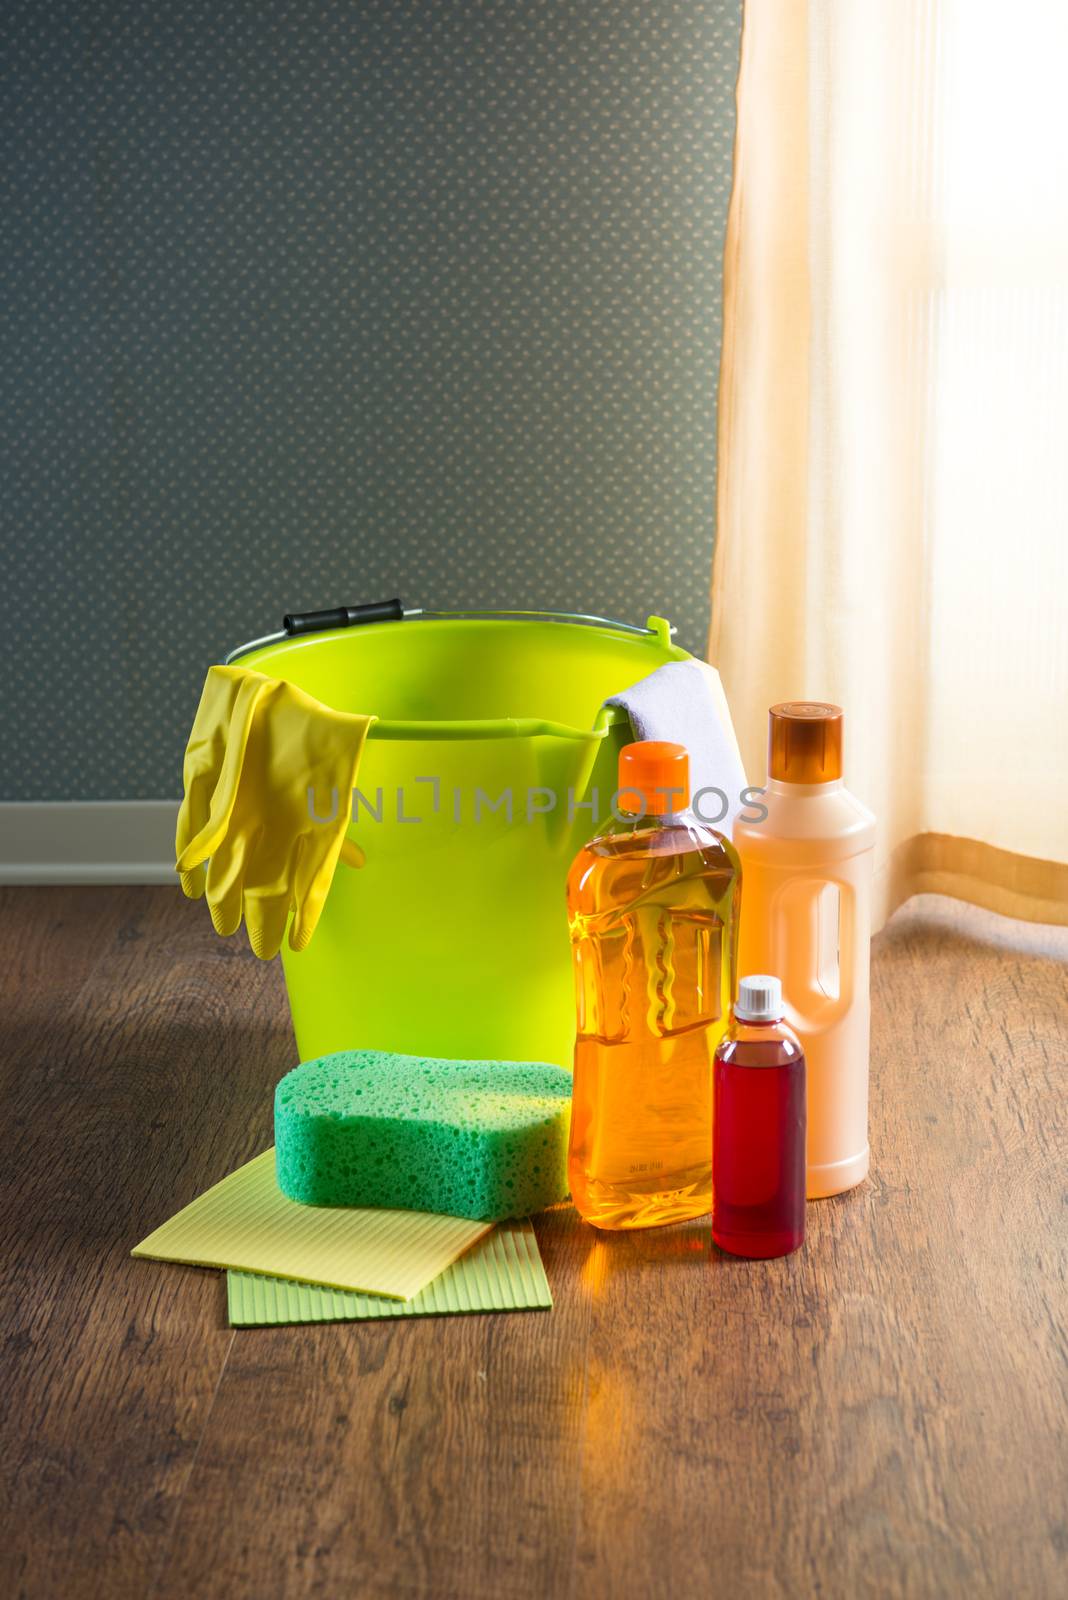 Wood cleaners and detergents on floor with bucket, gloves, cloth and sponges.